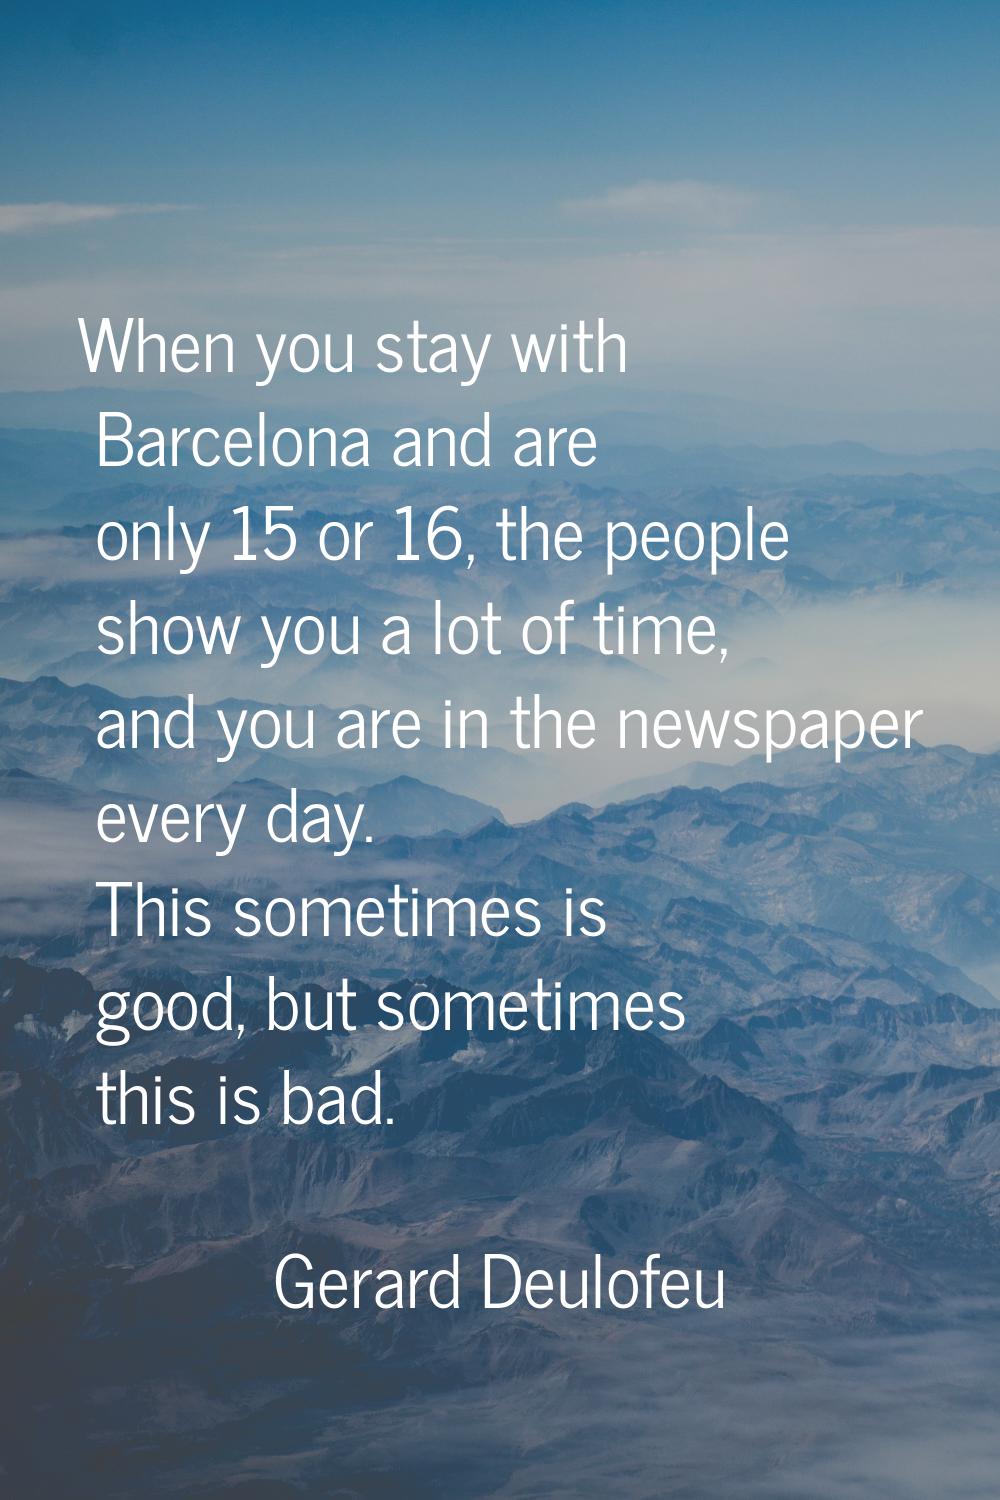 When you stay with Barcelona and are only 15 or 16, the people show you a lot of time, and you are 